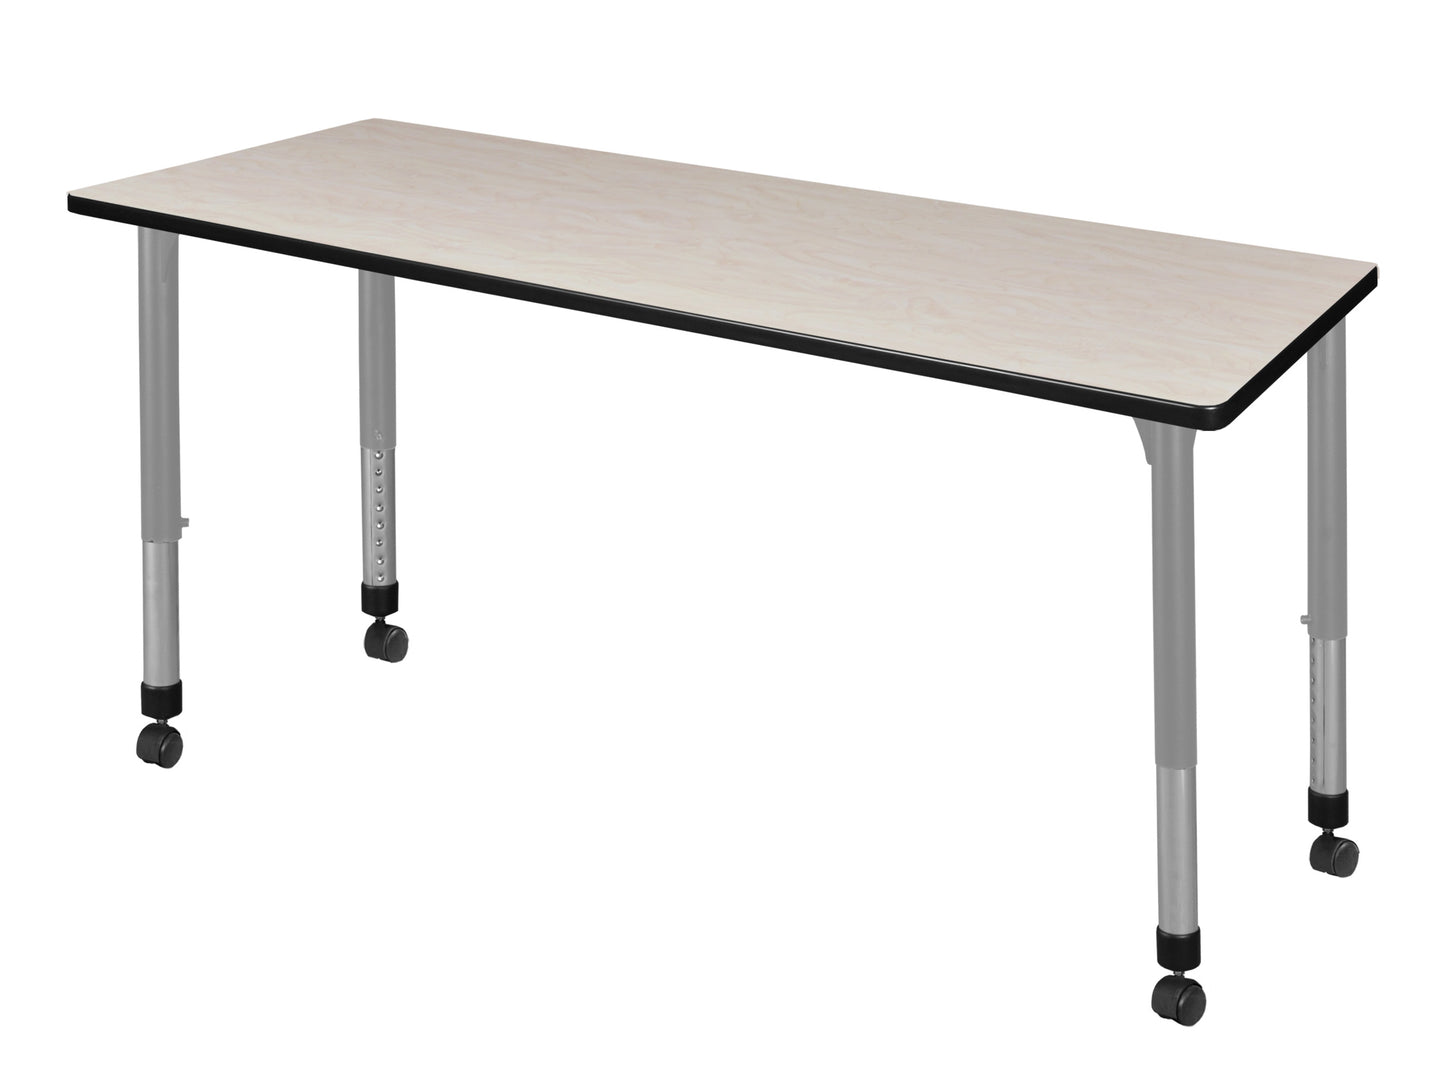 Regency Kee 60 x 30 in. Height Adjustable Mobile Classroom Activity Table